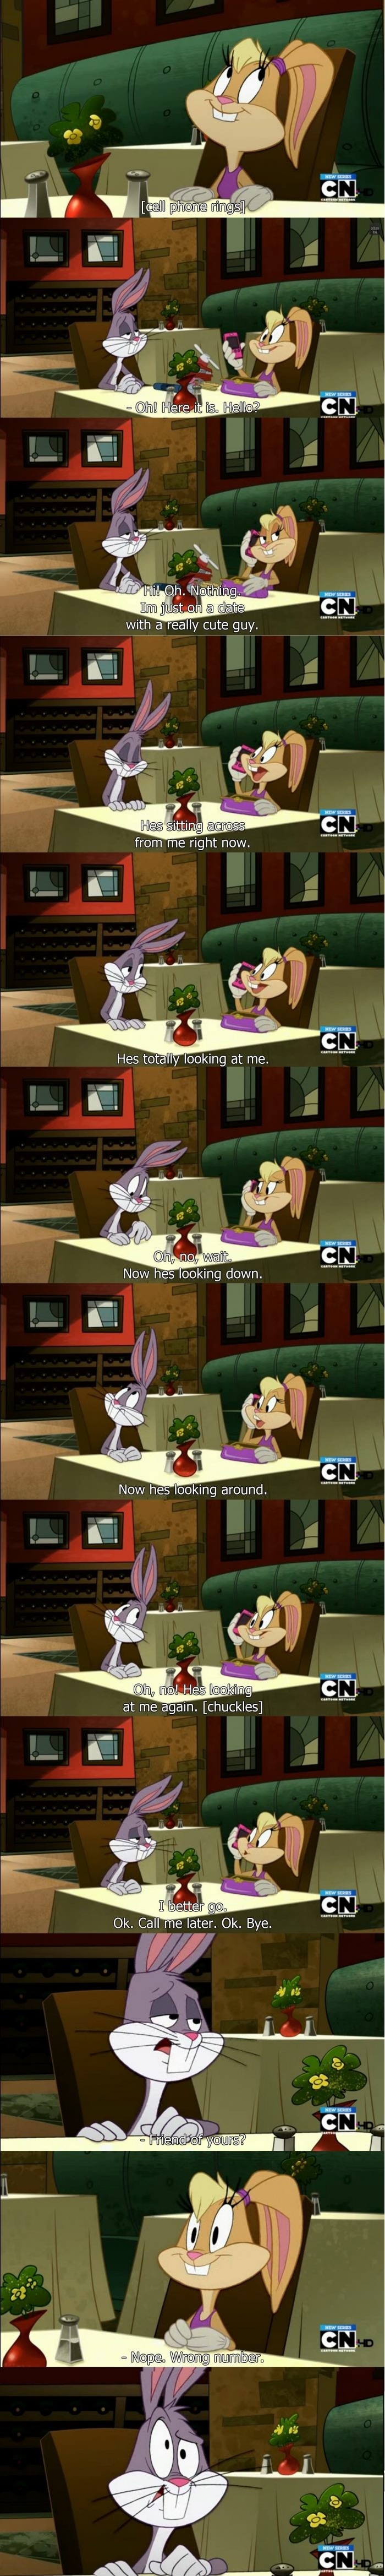 Bugs Bunny on a date